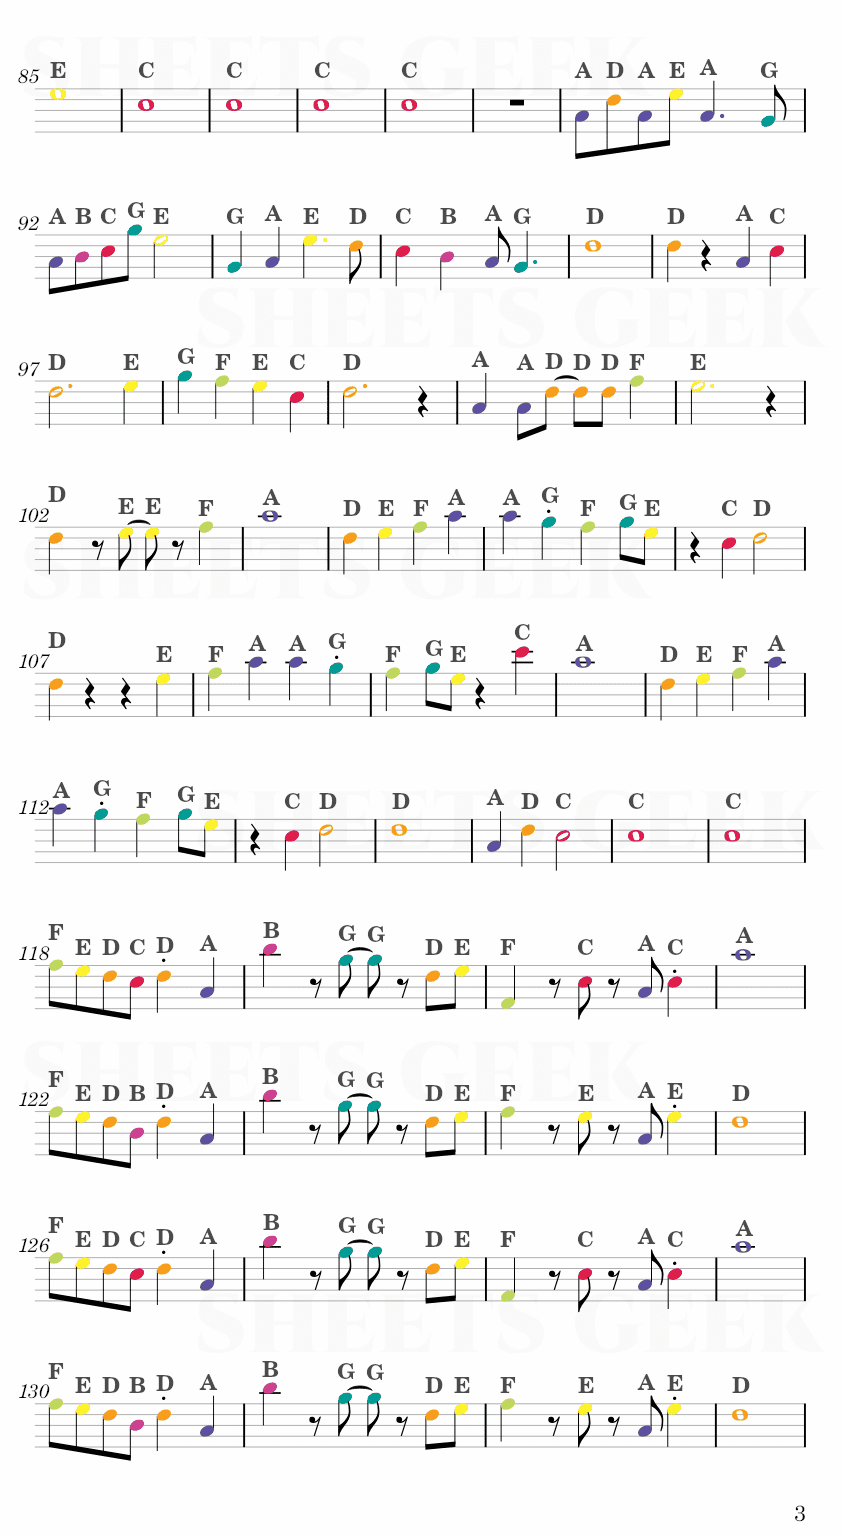 Asgore Theme - Undertale Easy Sheet Music Free for piano, keyboard, flute, violin, sax, cello page 3